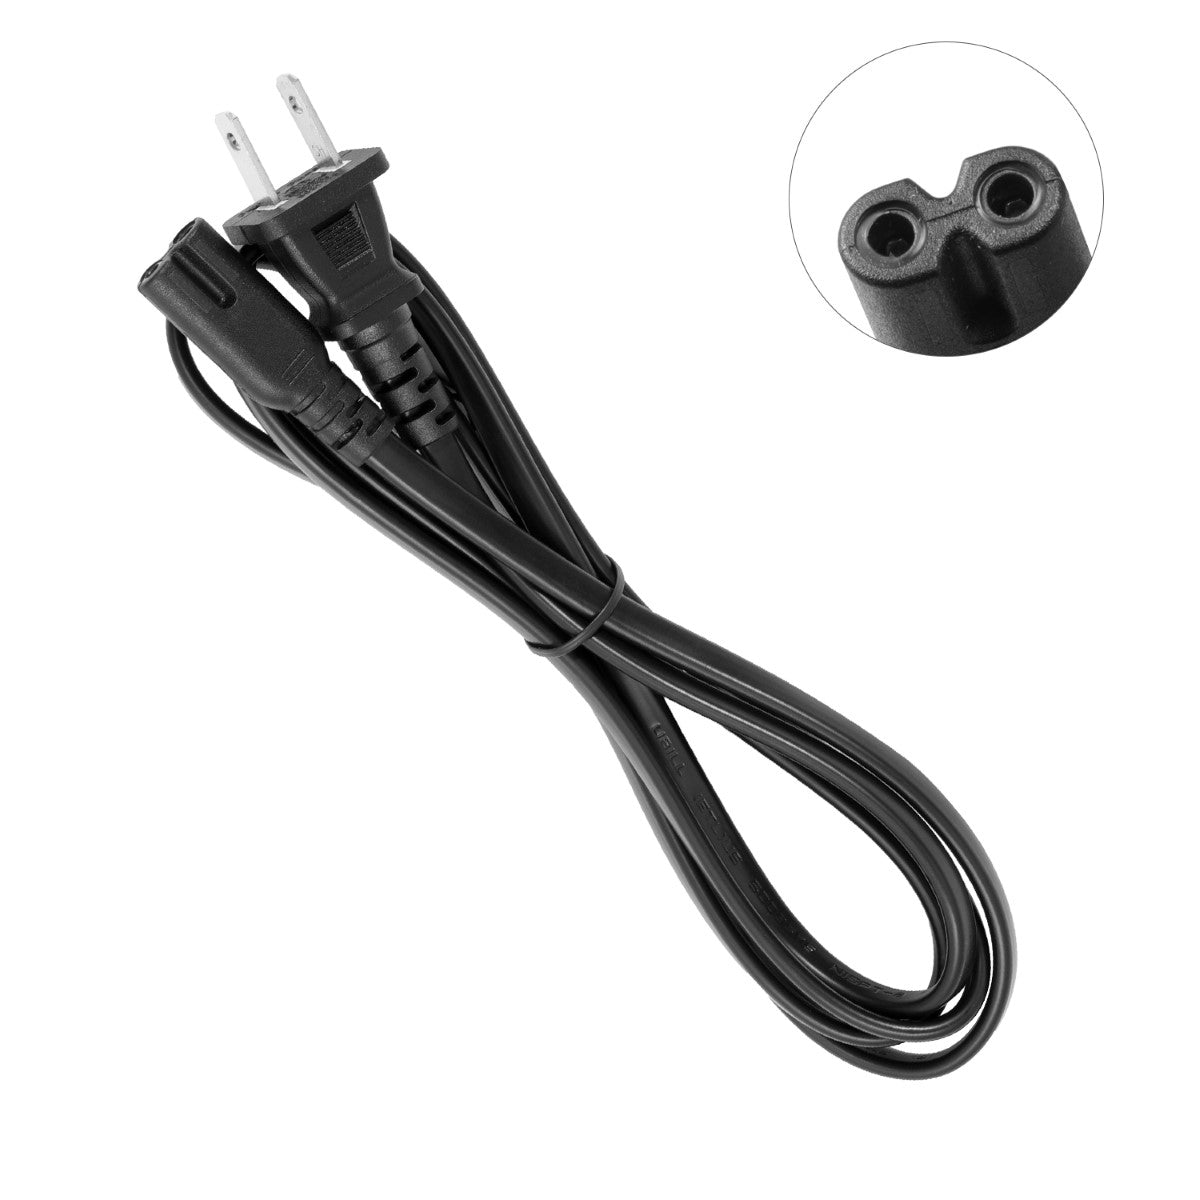 Power Cord for HP ENVY 121 e-All-in-One Printer.